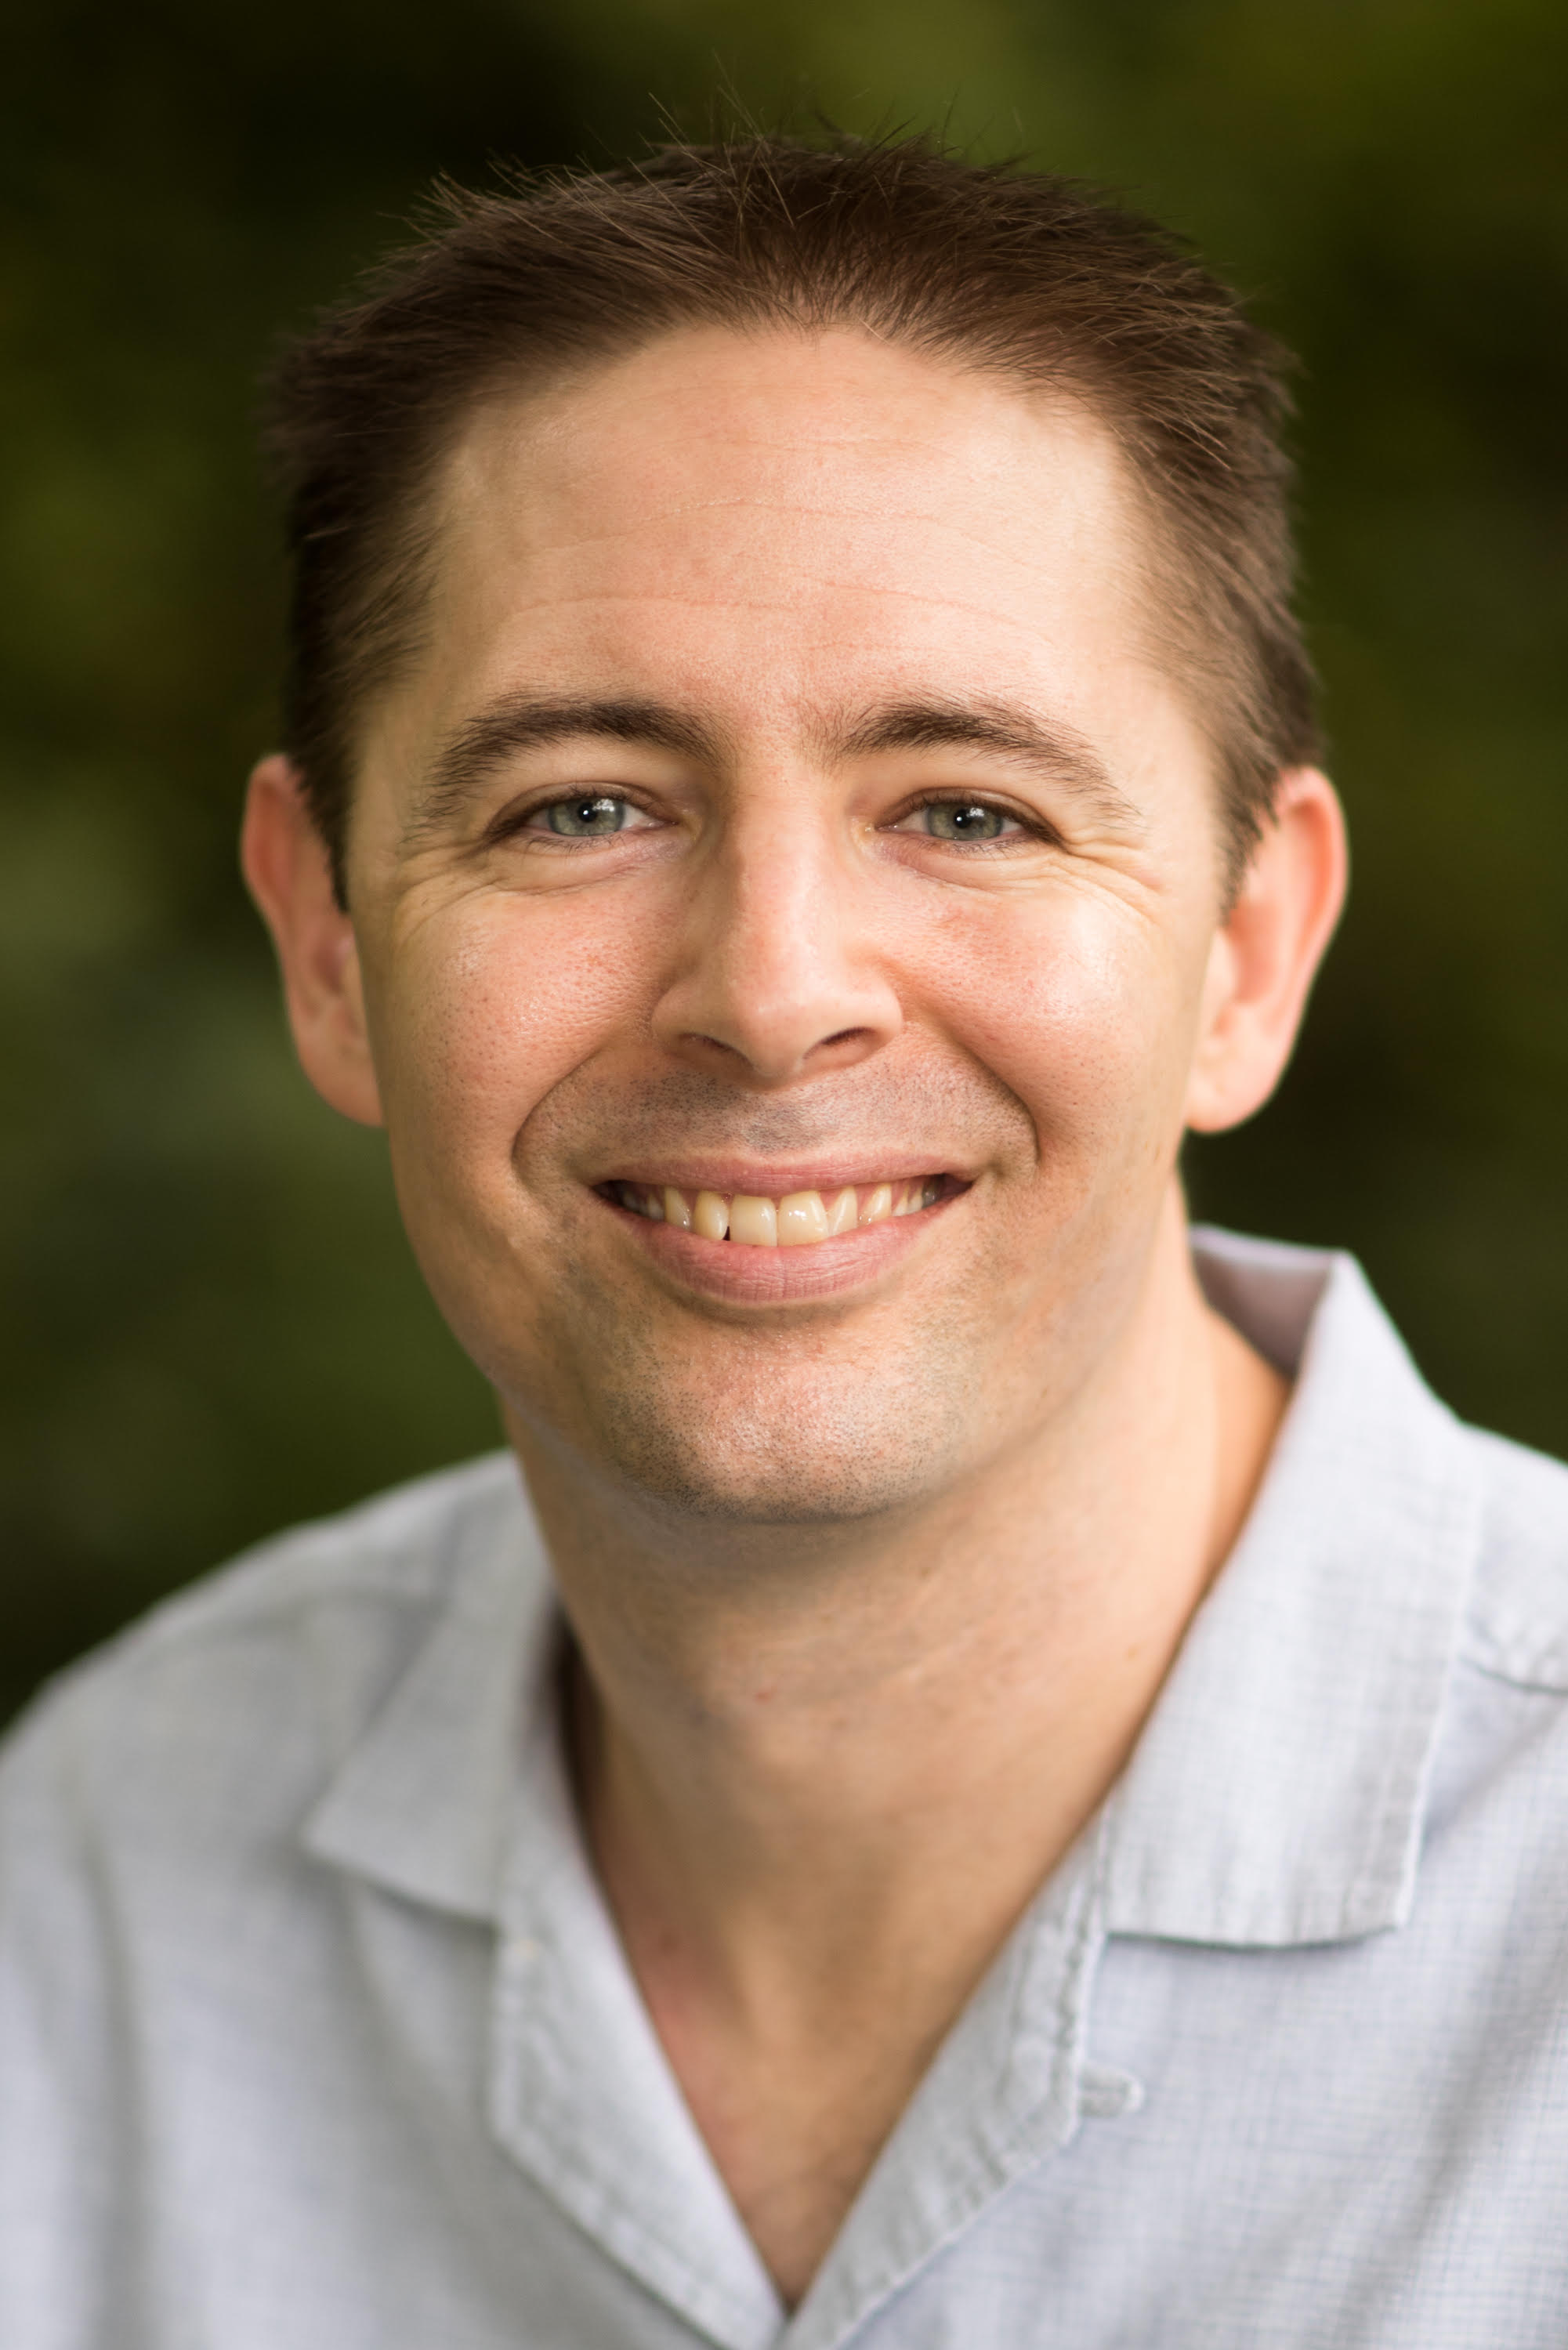 Chris Rozell, professor in the School of Electrical and Computer Engineering